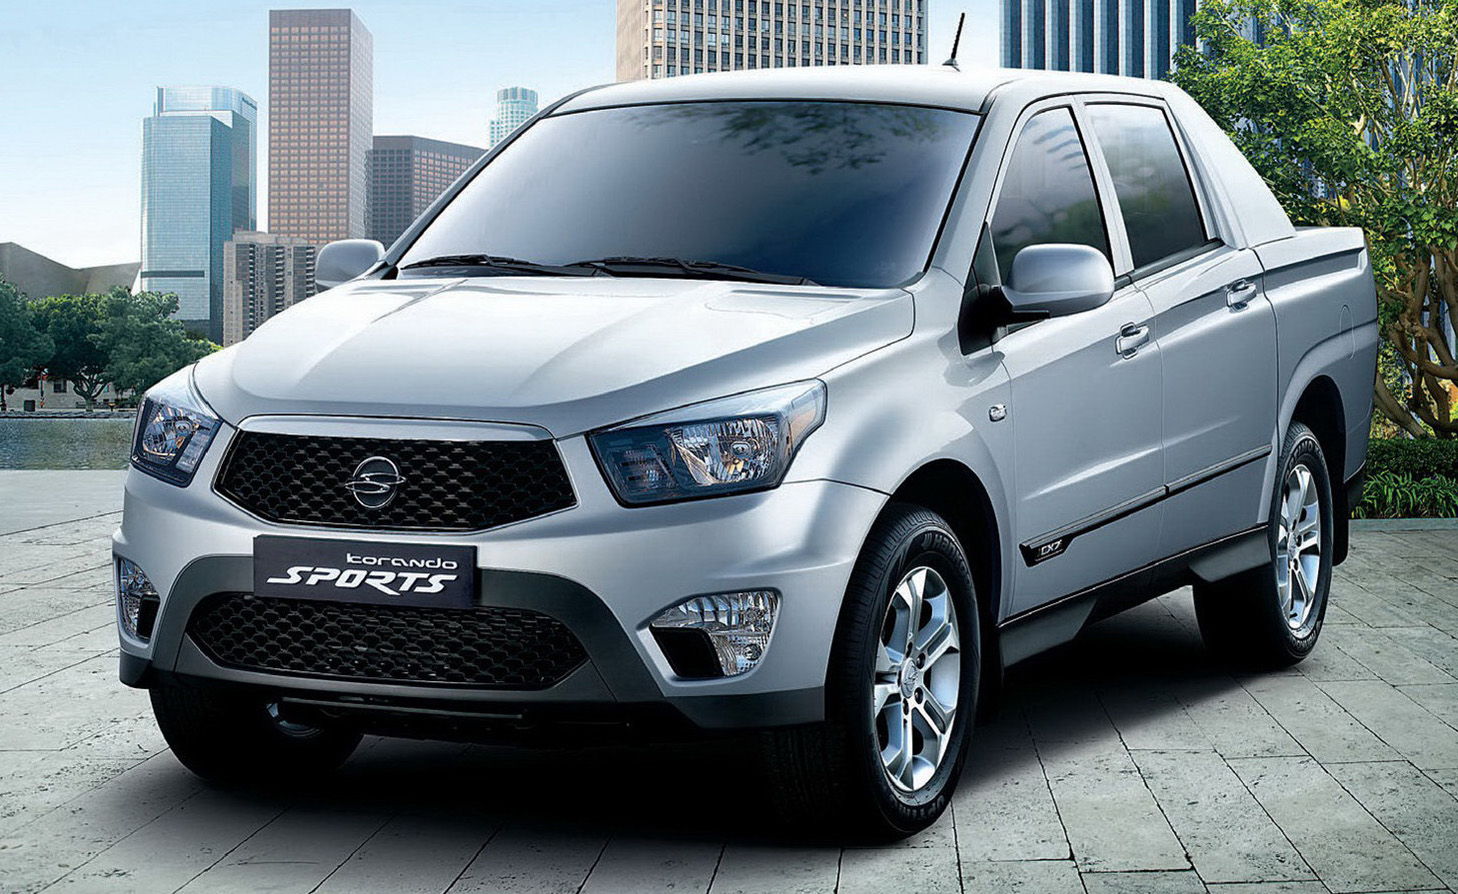 SsangYong Actyon-Sports  2.0d AT (141 HP) - dane techniczne, wymiary, spalanie i opinie